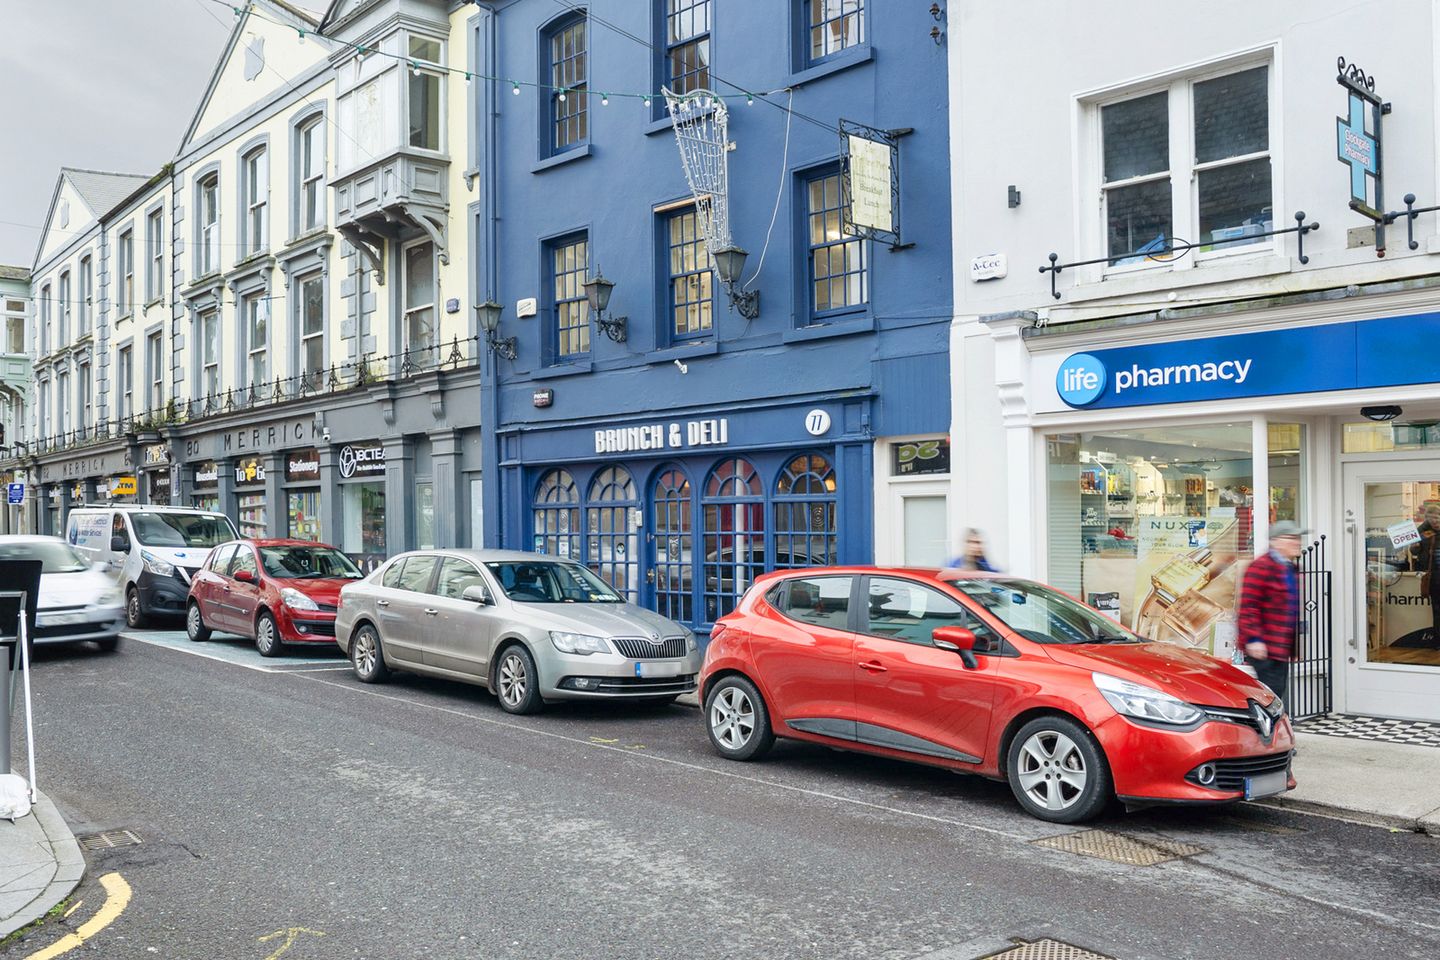 77 North Main Street, Youghal, Co. Cork, P36W528